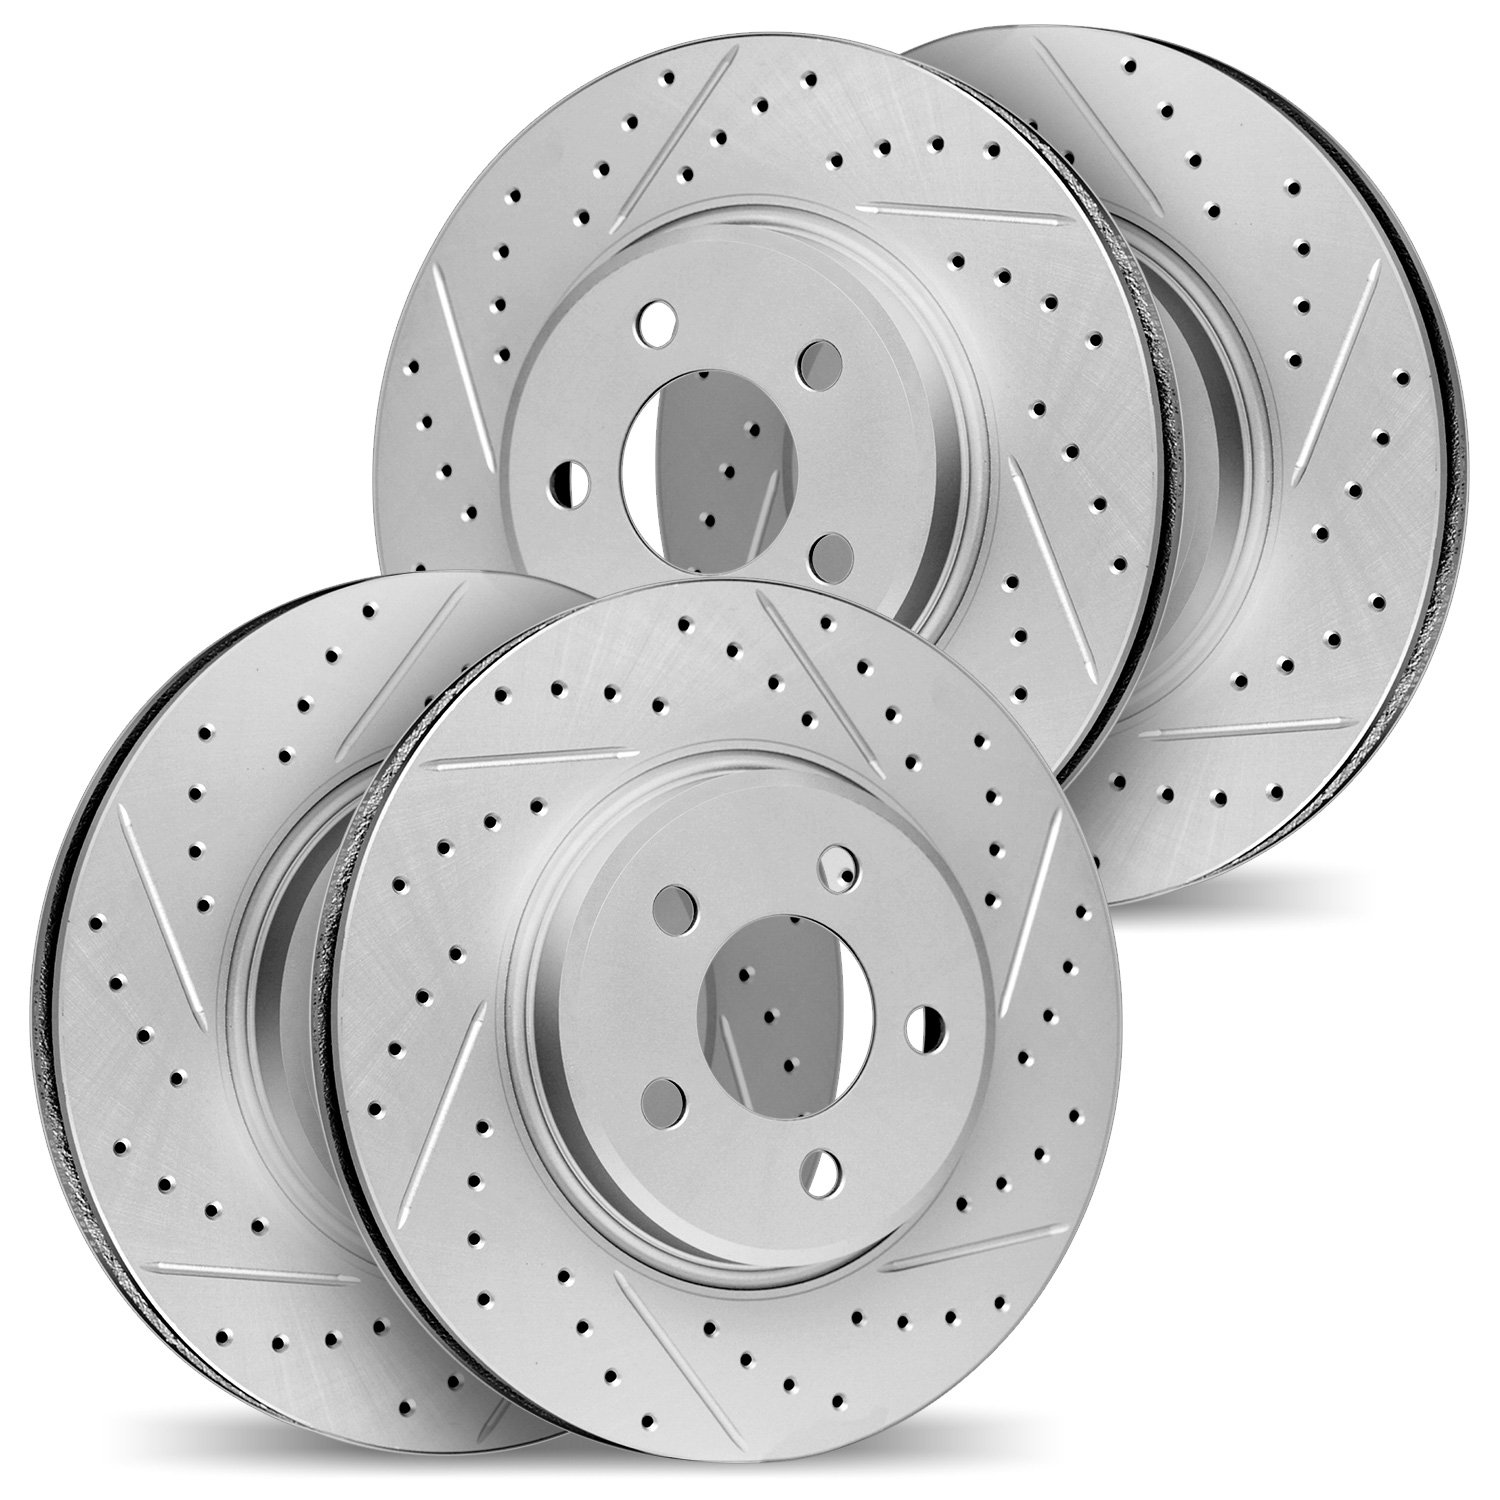 2004-13027 Geoperformance Drilled/Slotted Brake Rotors, 2008-2020 Subaru, Position: Front and Rear